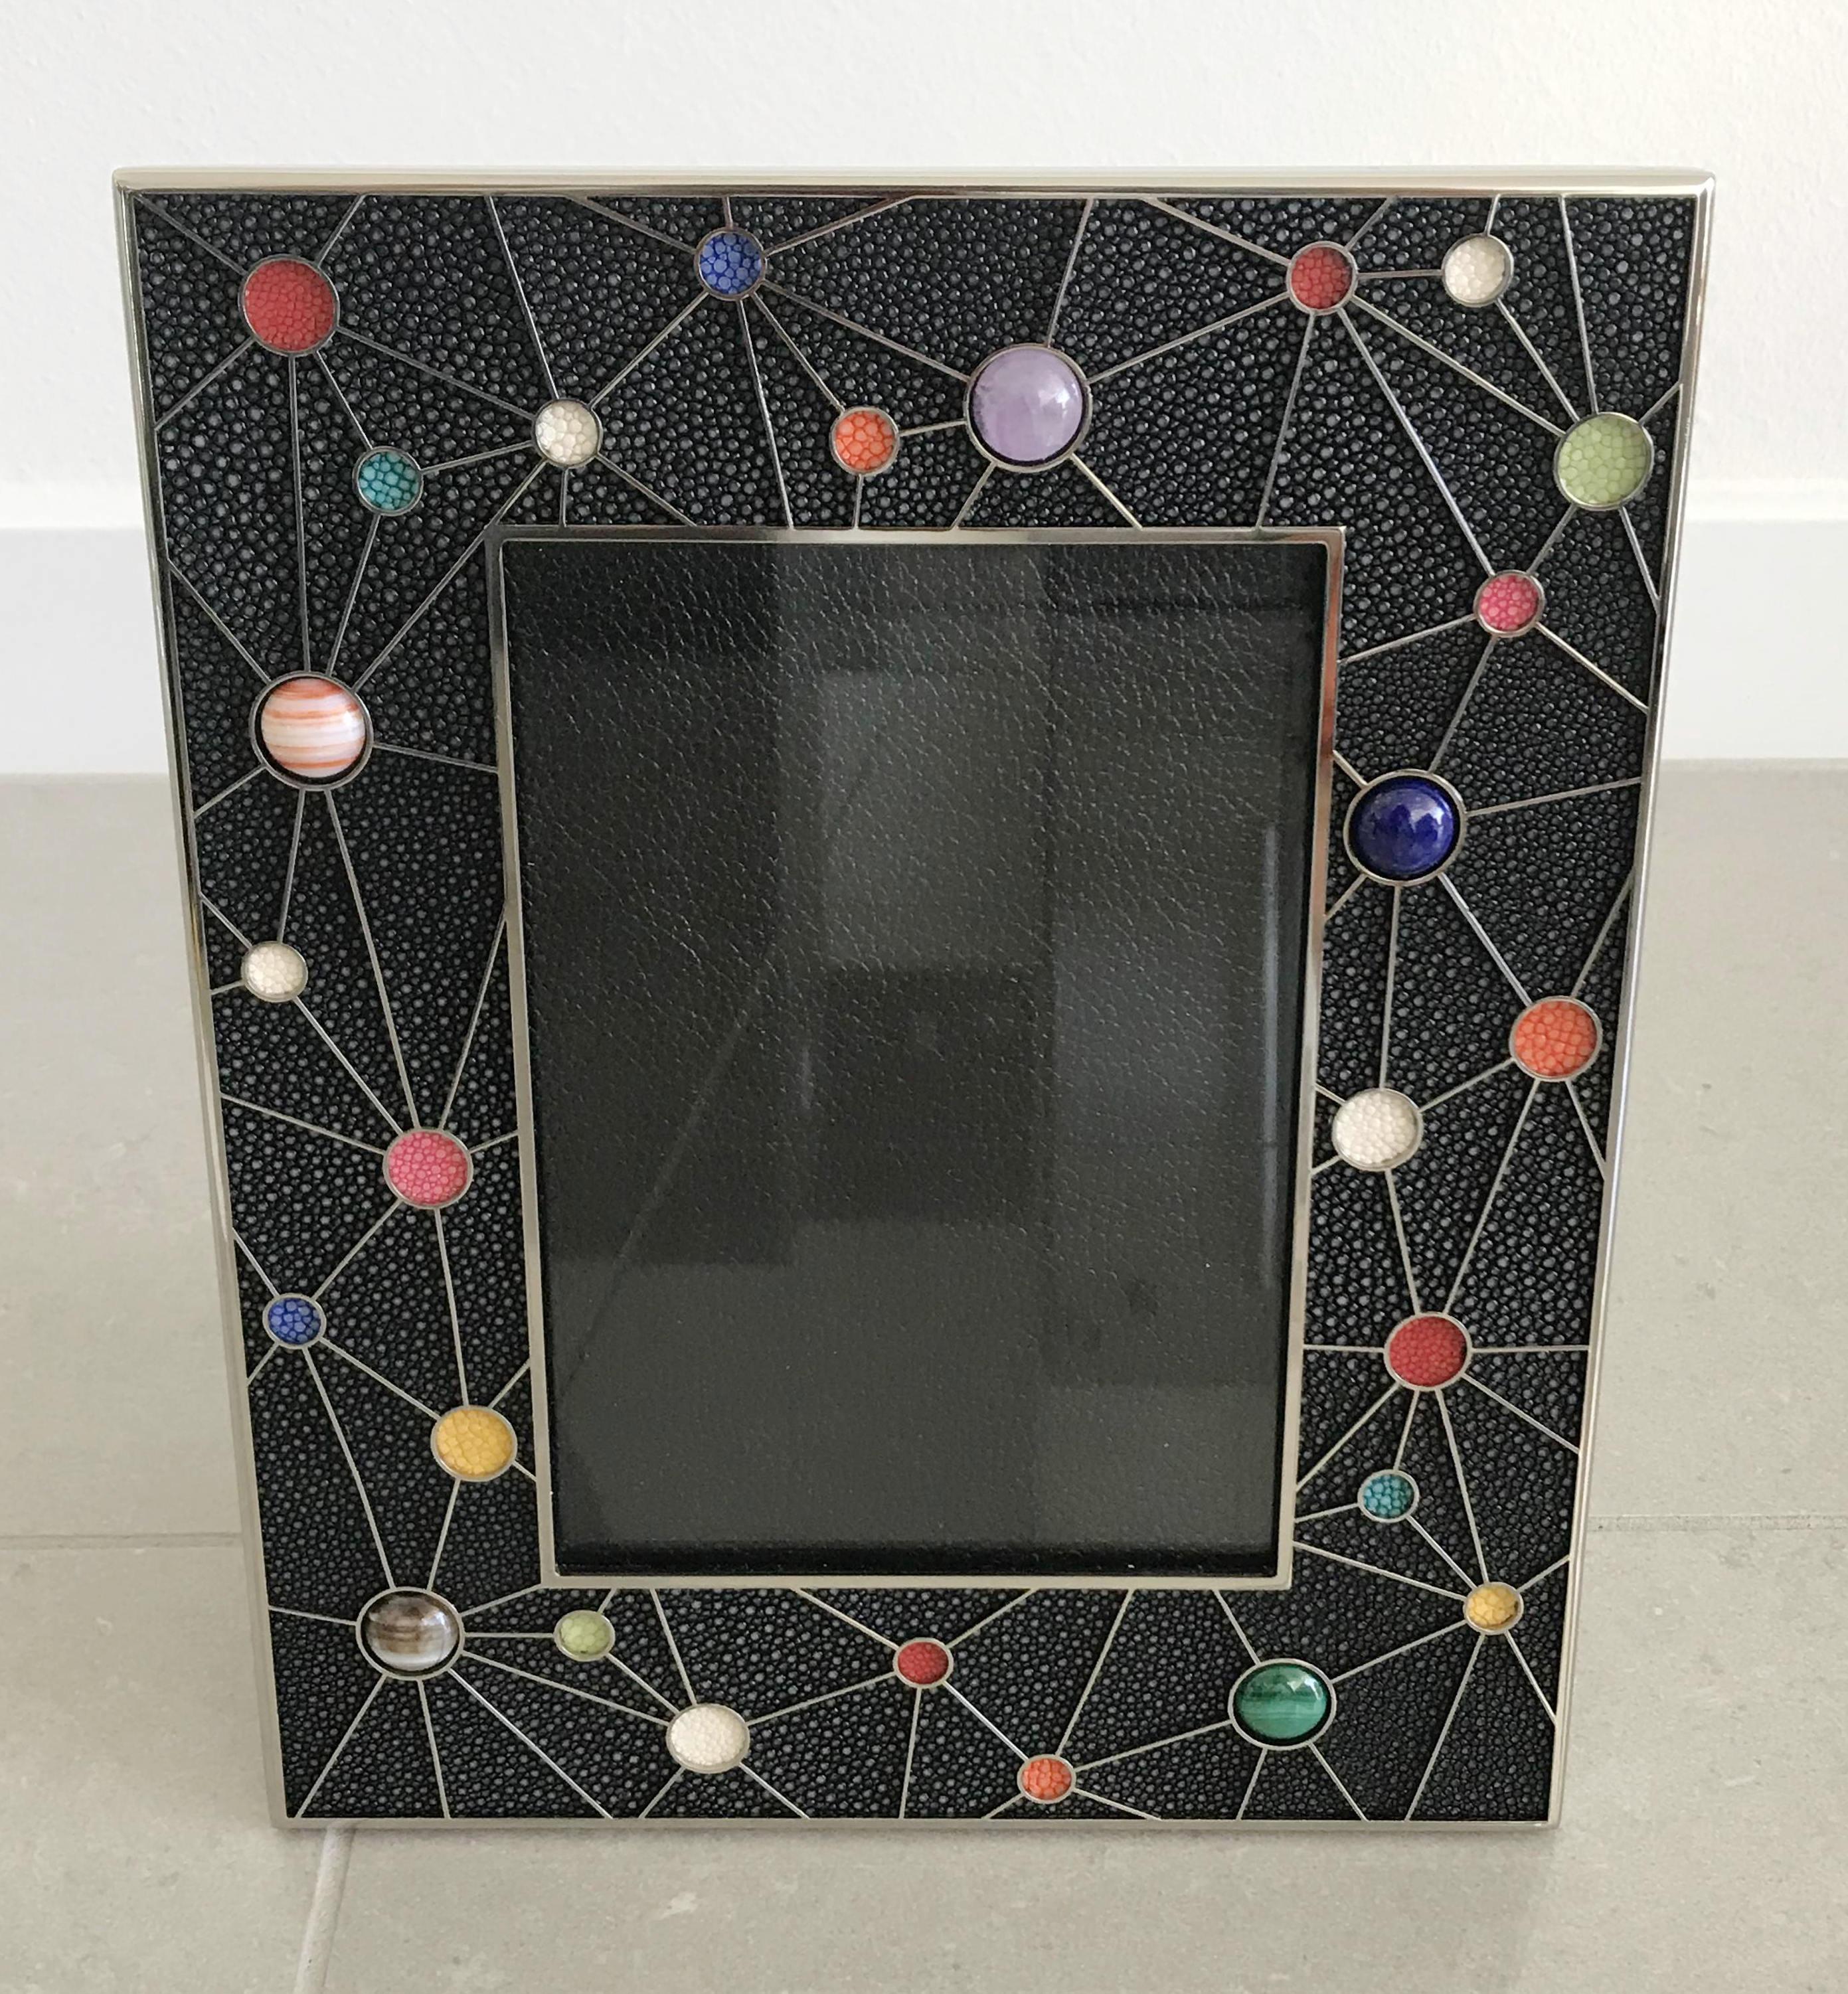 Black shagreen leather with multi-color stone inserts and nickel-plated picture frames by Fabio Ltd
Measures: Height 10.5 inches / width 8.5 inches / depth 1 inch
Photo size: 5 inches by 7 inches
LAST 2 in stock in Los Angeles
Order Reference #: